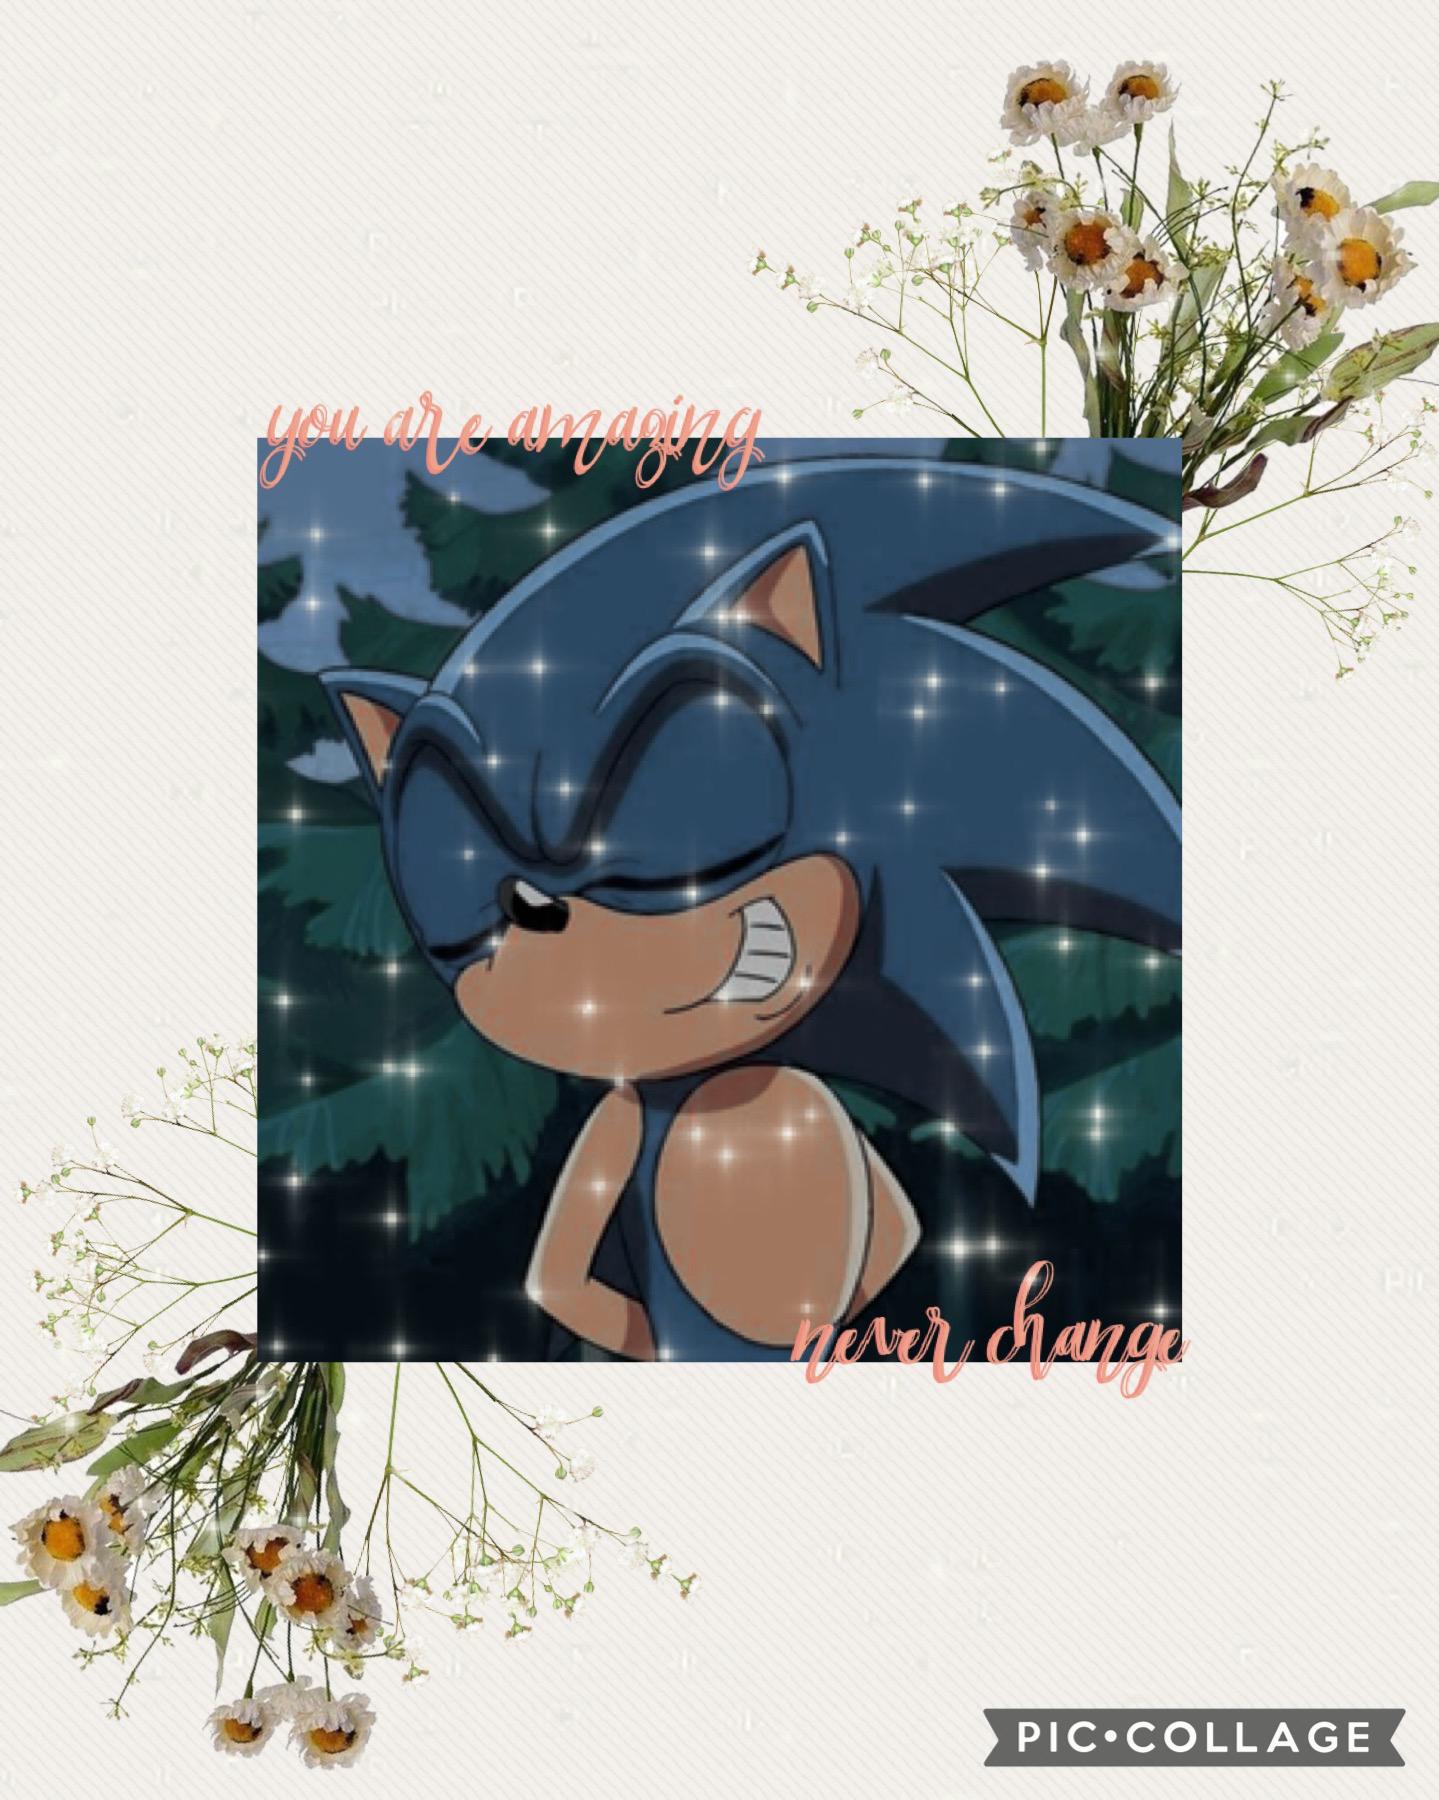 I love how this came out! For those of u who don't know, this is my main man (well, hedgehog) that has helped me be who i am today! If it werent for him, i'd still be the jerk i was a few years ago. Say hello to Sonic the Hedgehog!